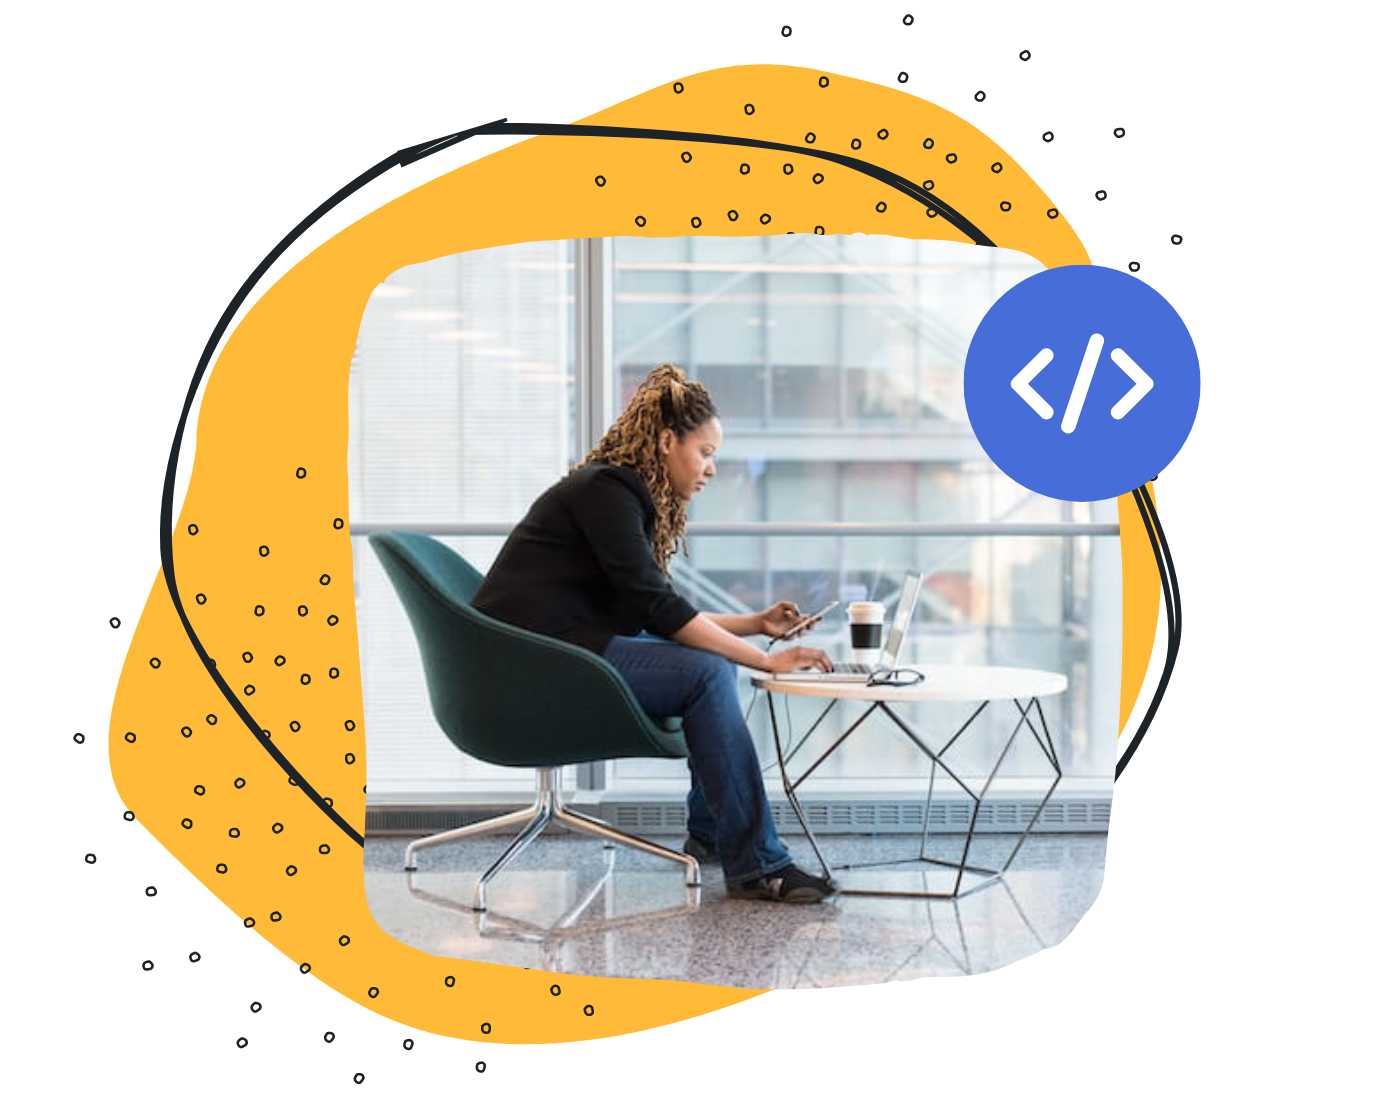 Graphic with a yellow organic shape, coding icon, and a photograph of a person side profile sitting at their computer